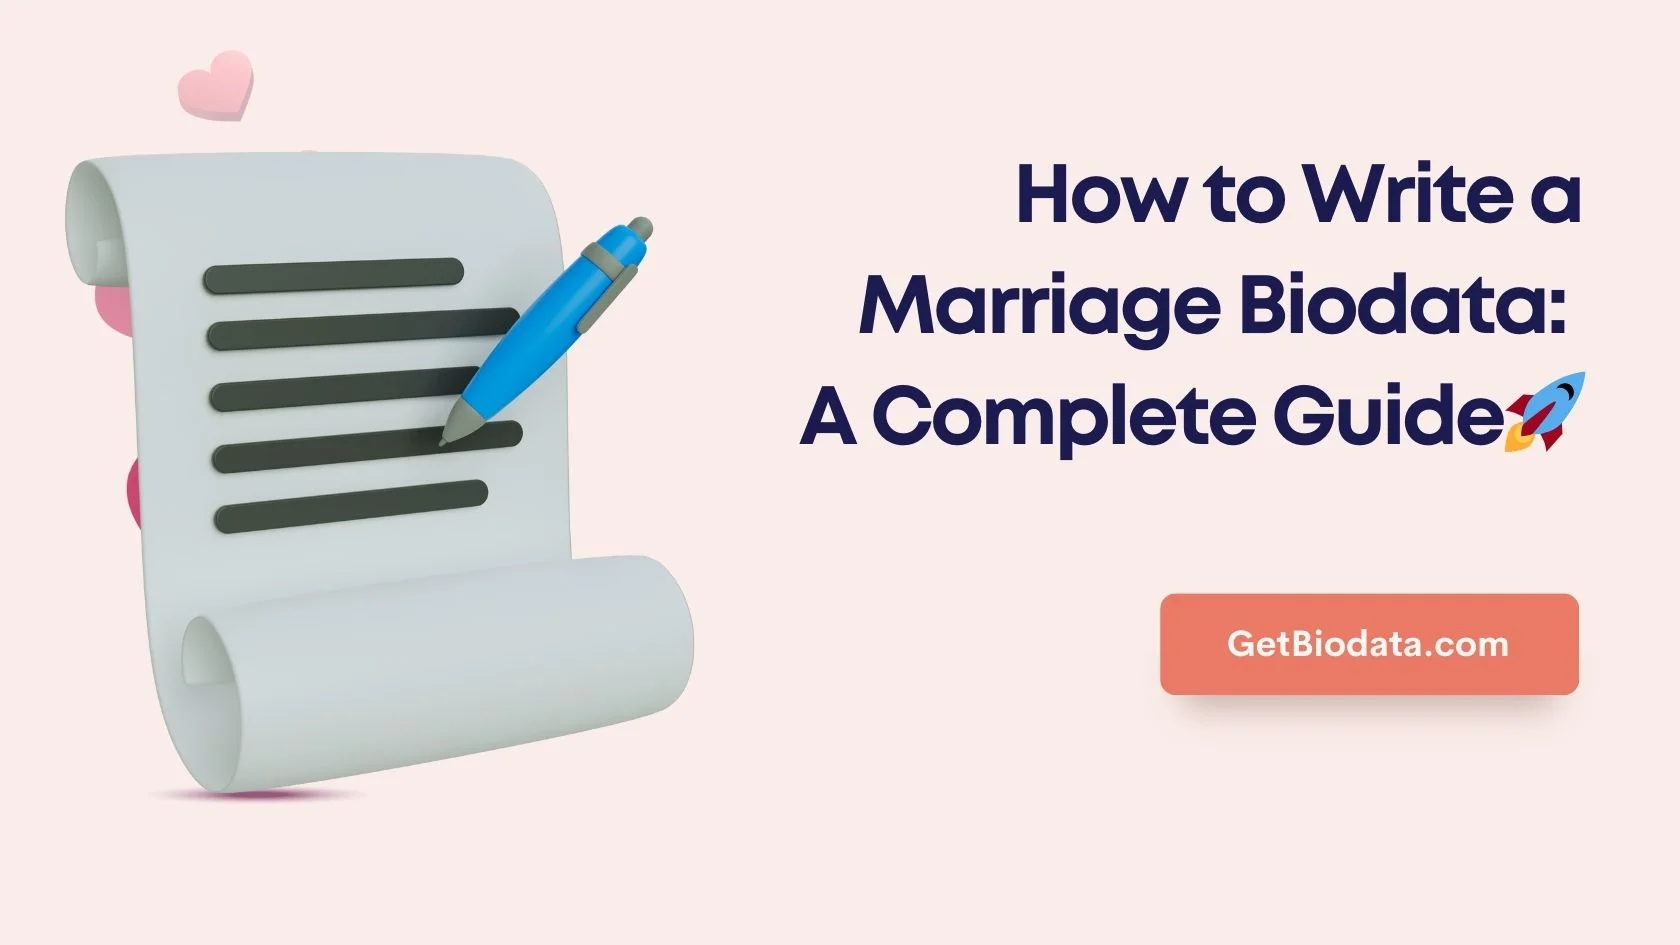 How to Write a Marriage Biodata: A Complete Guide